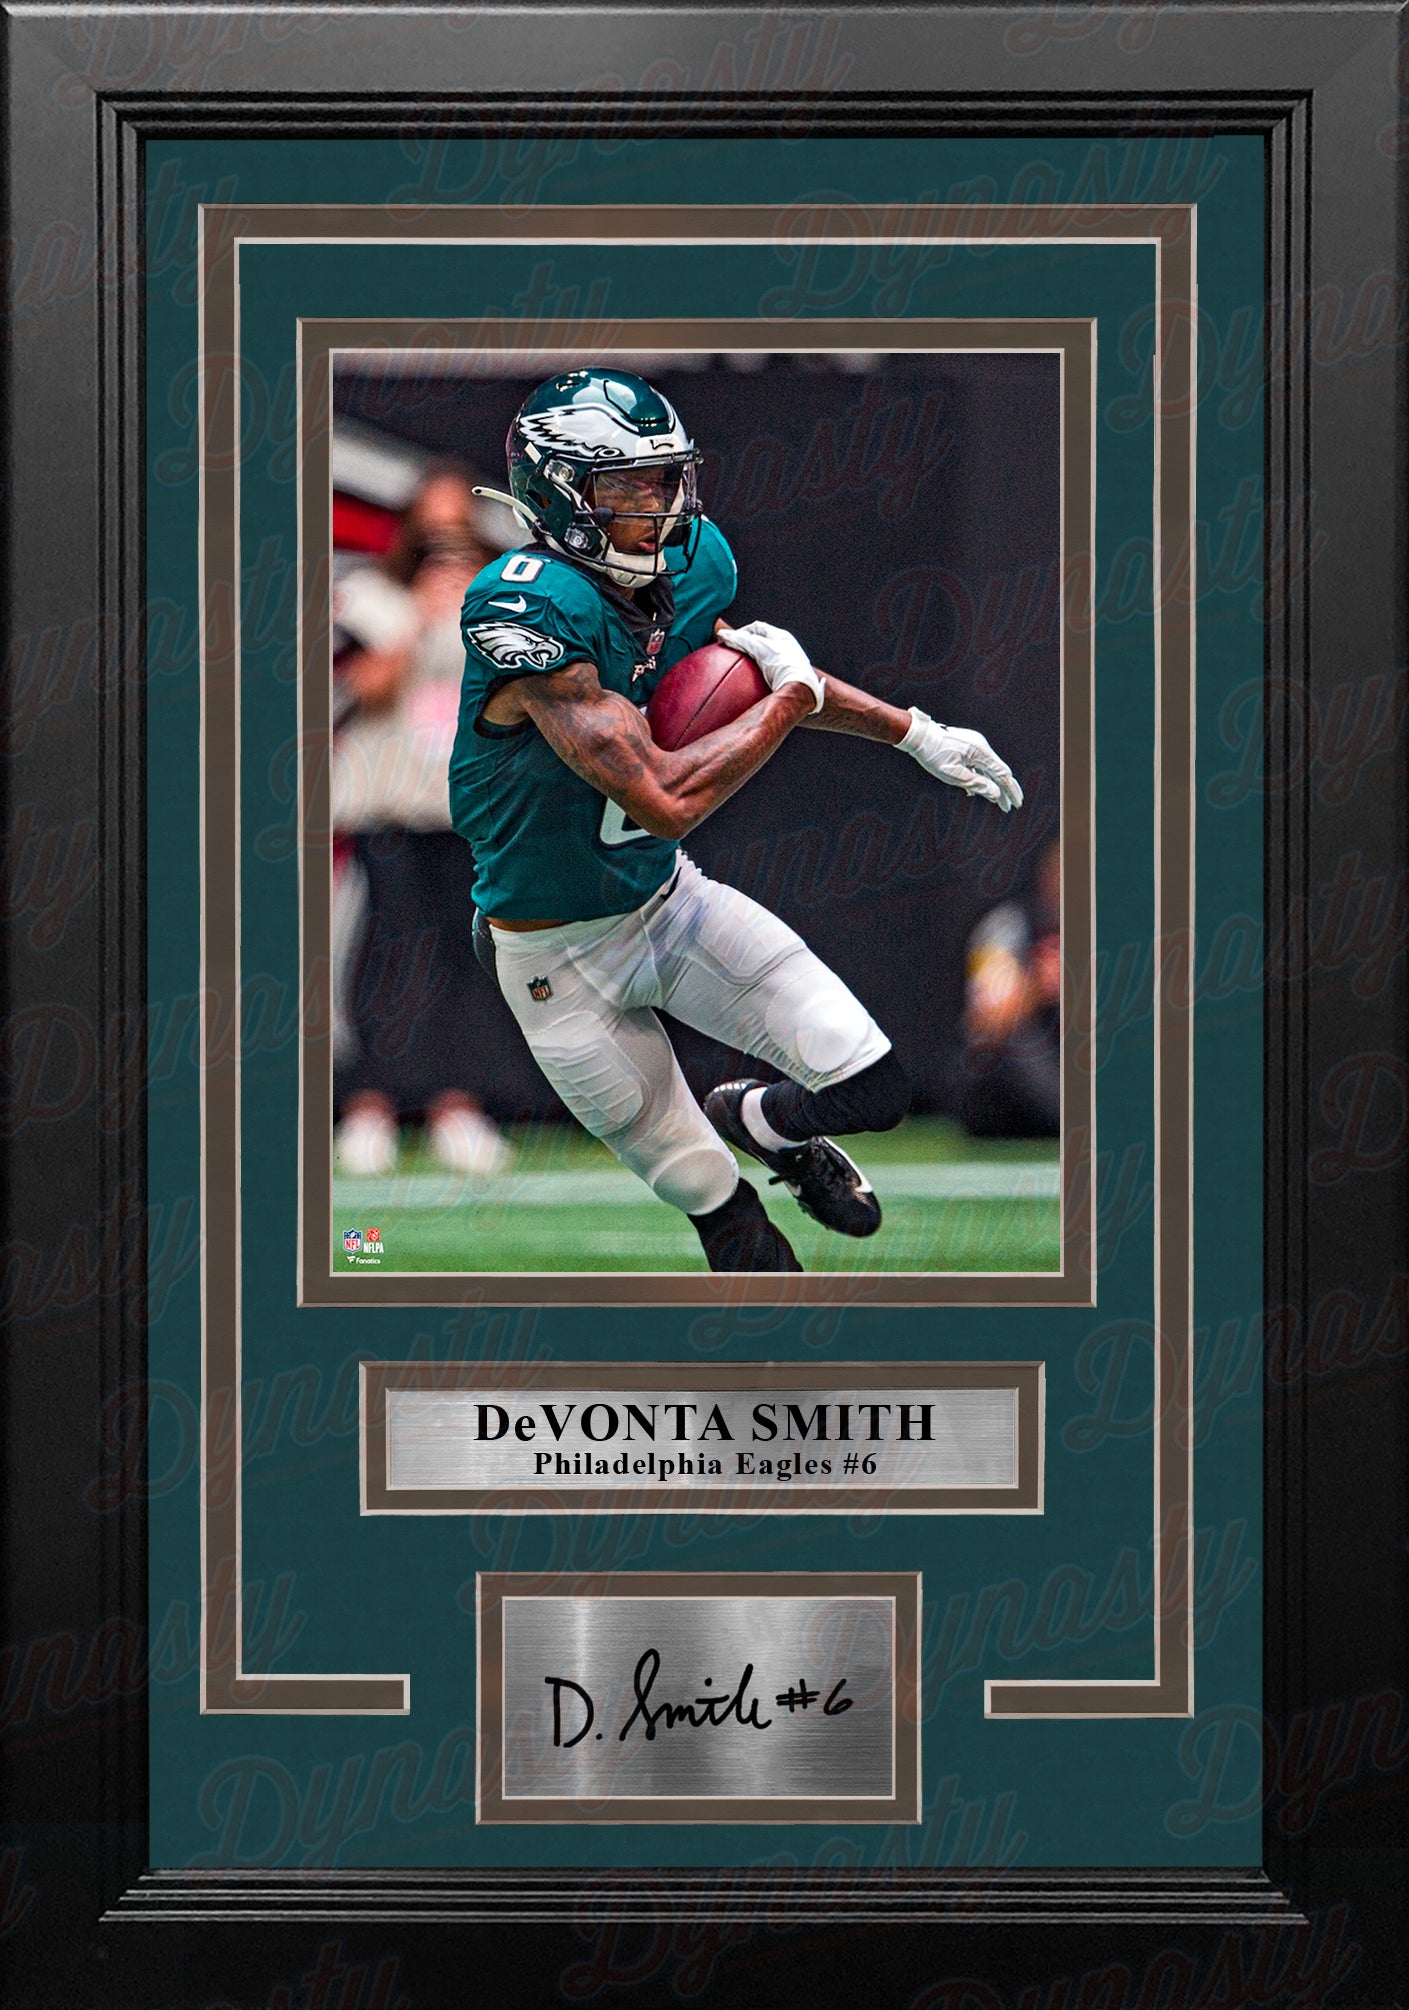 DeVonta Smith in Action Philadelphia Eagles 8' x 10' Framed Football Photo  with Engraved Autograph